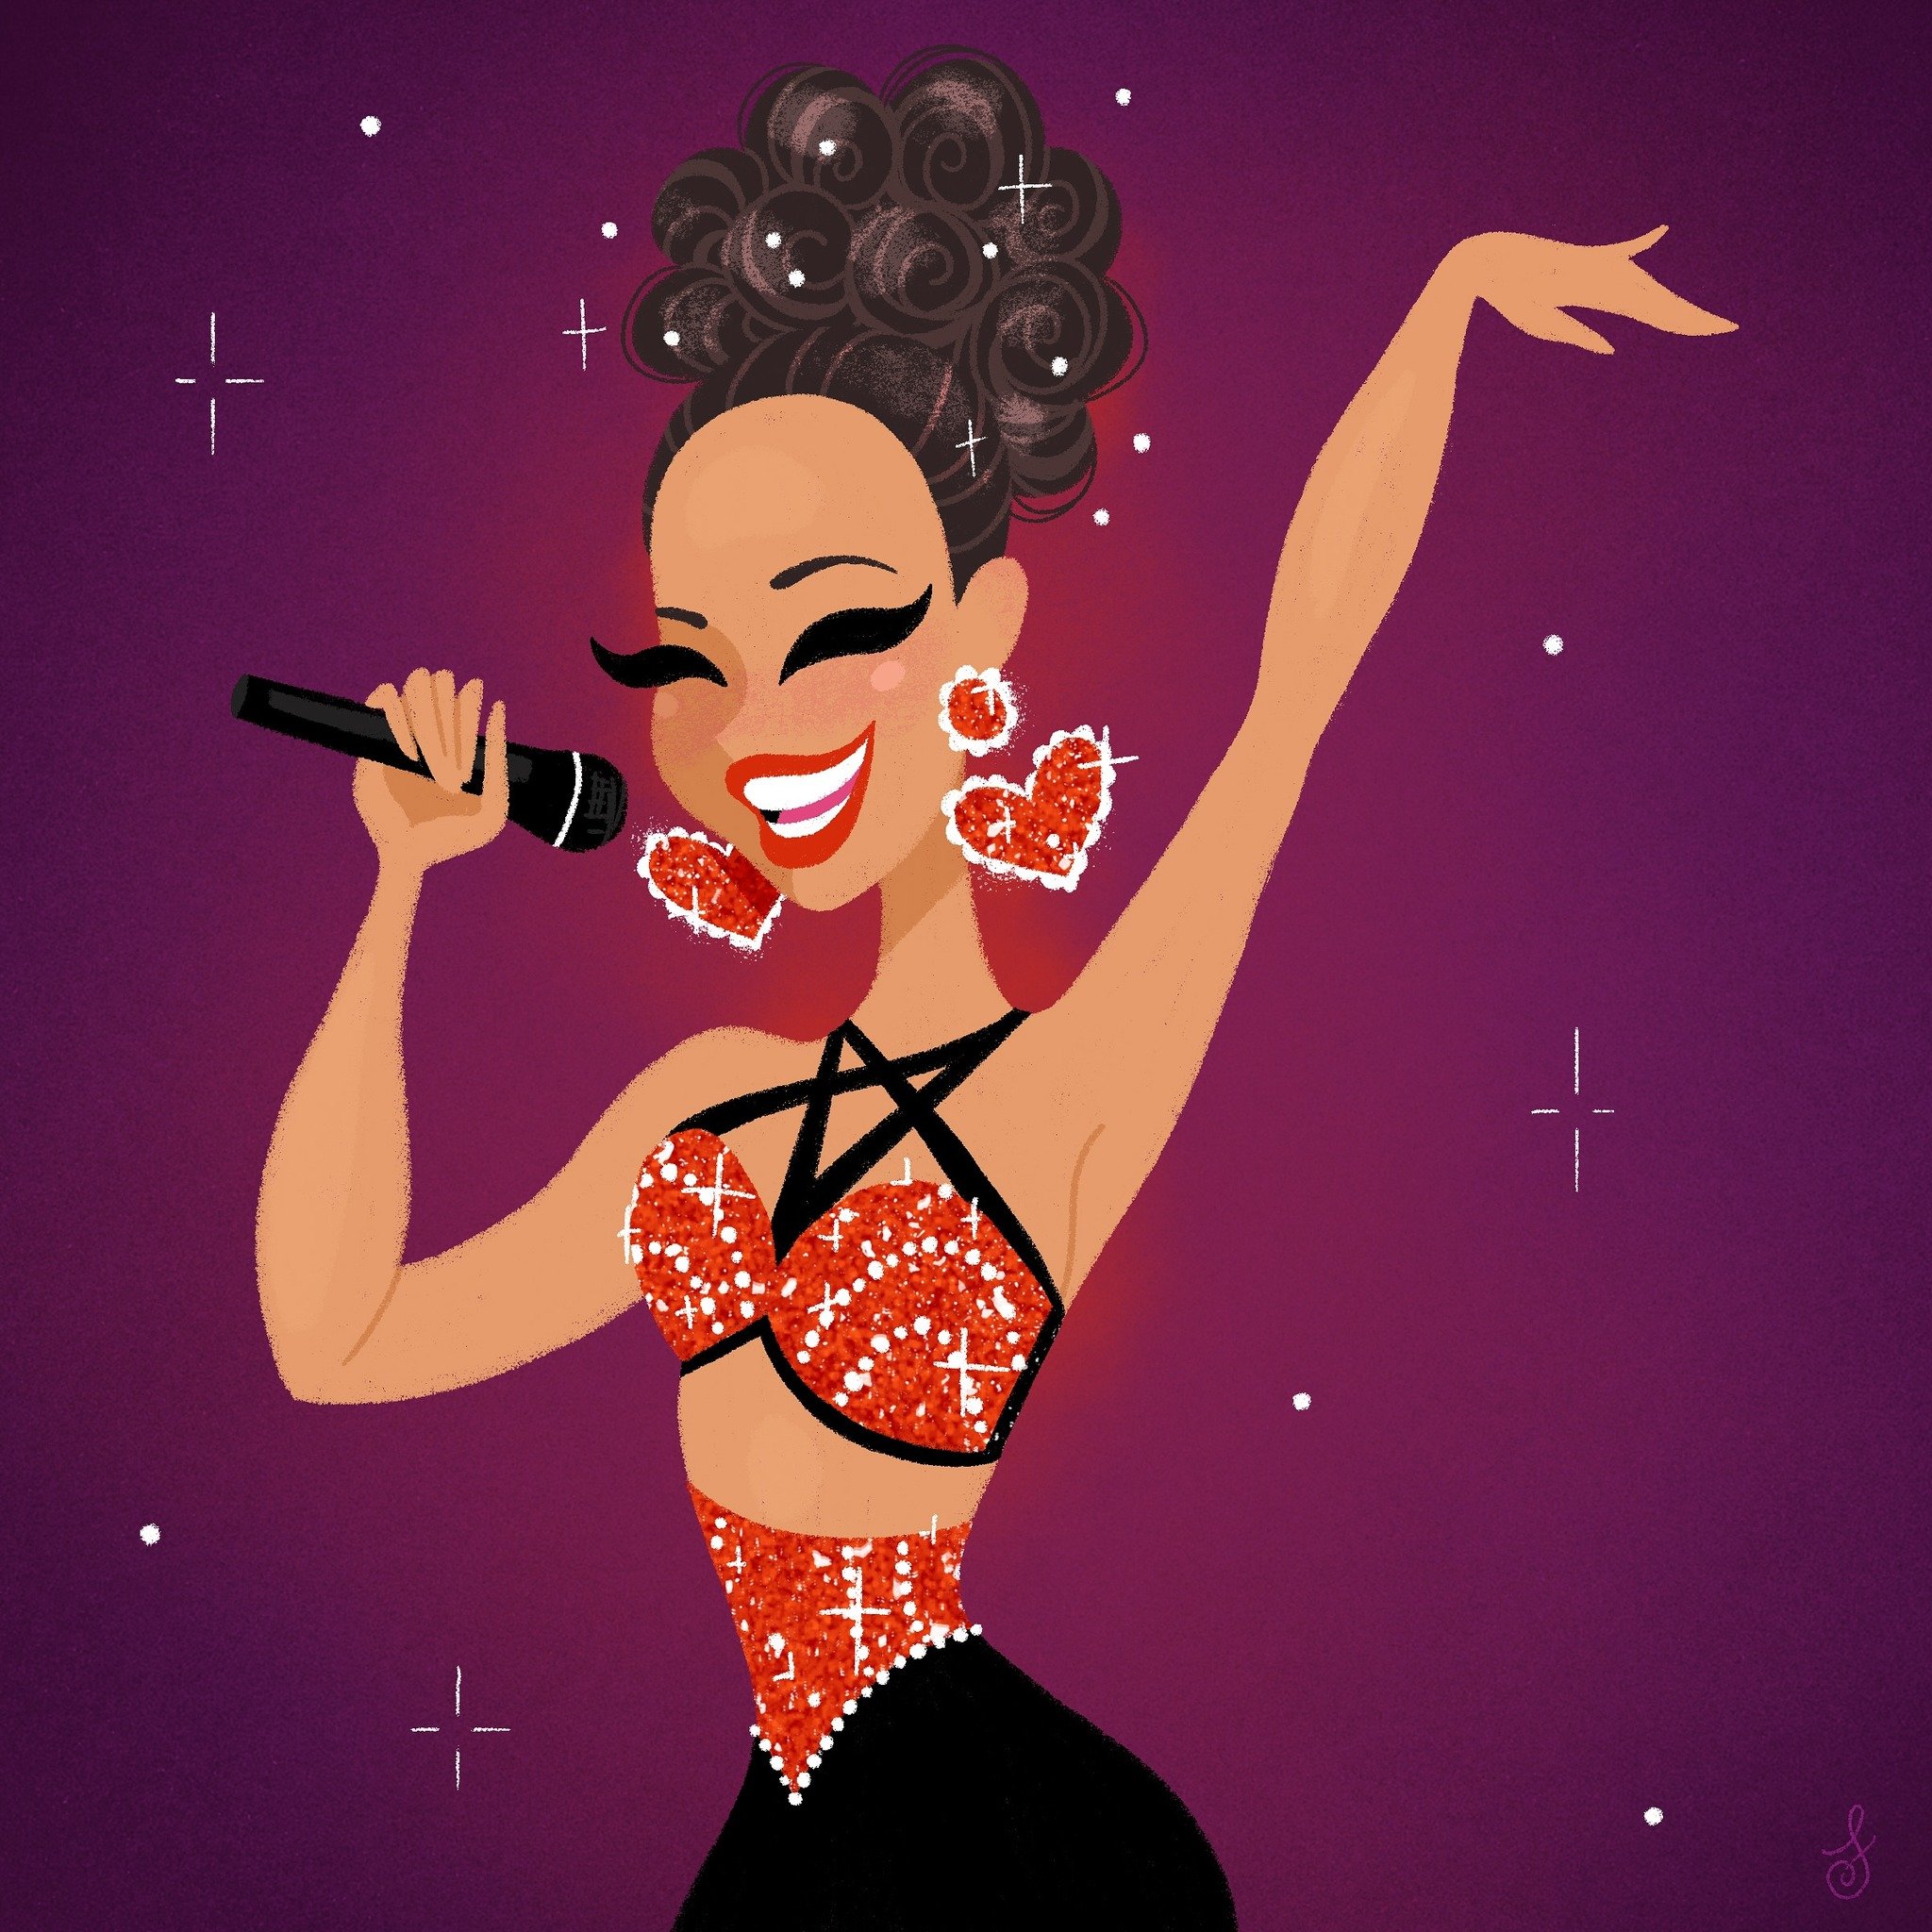 Remembering Selena on what would have been her 53rd birthday 🌹
.
.
.
.
.
#designedbyshea #vintagestylenotvintagevalues #retrostyle #womenwhodraw #womenwhodraw #womenofillustration #pinupstyle #fashionillustration #vintagestyle #selena #selenaqueenta